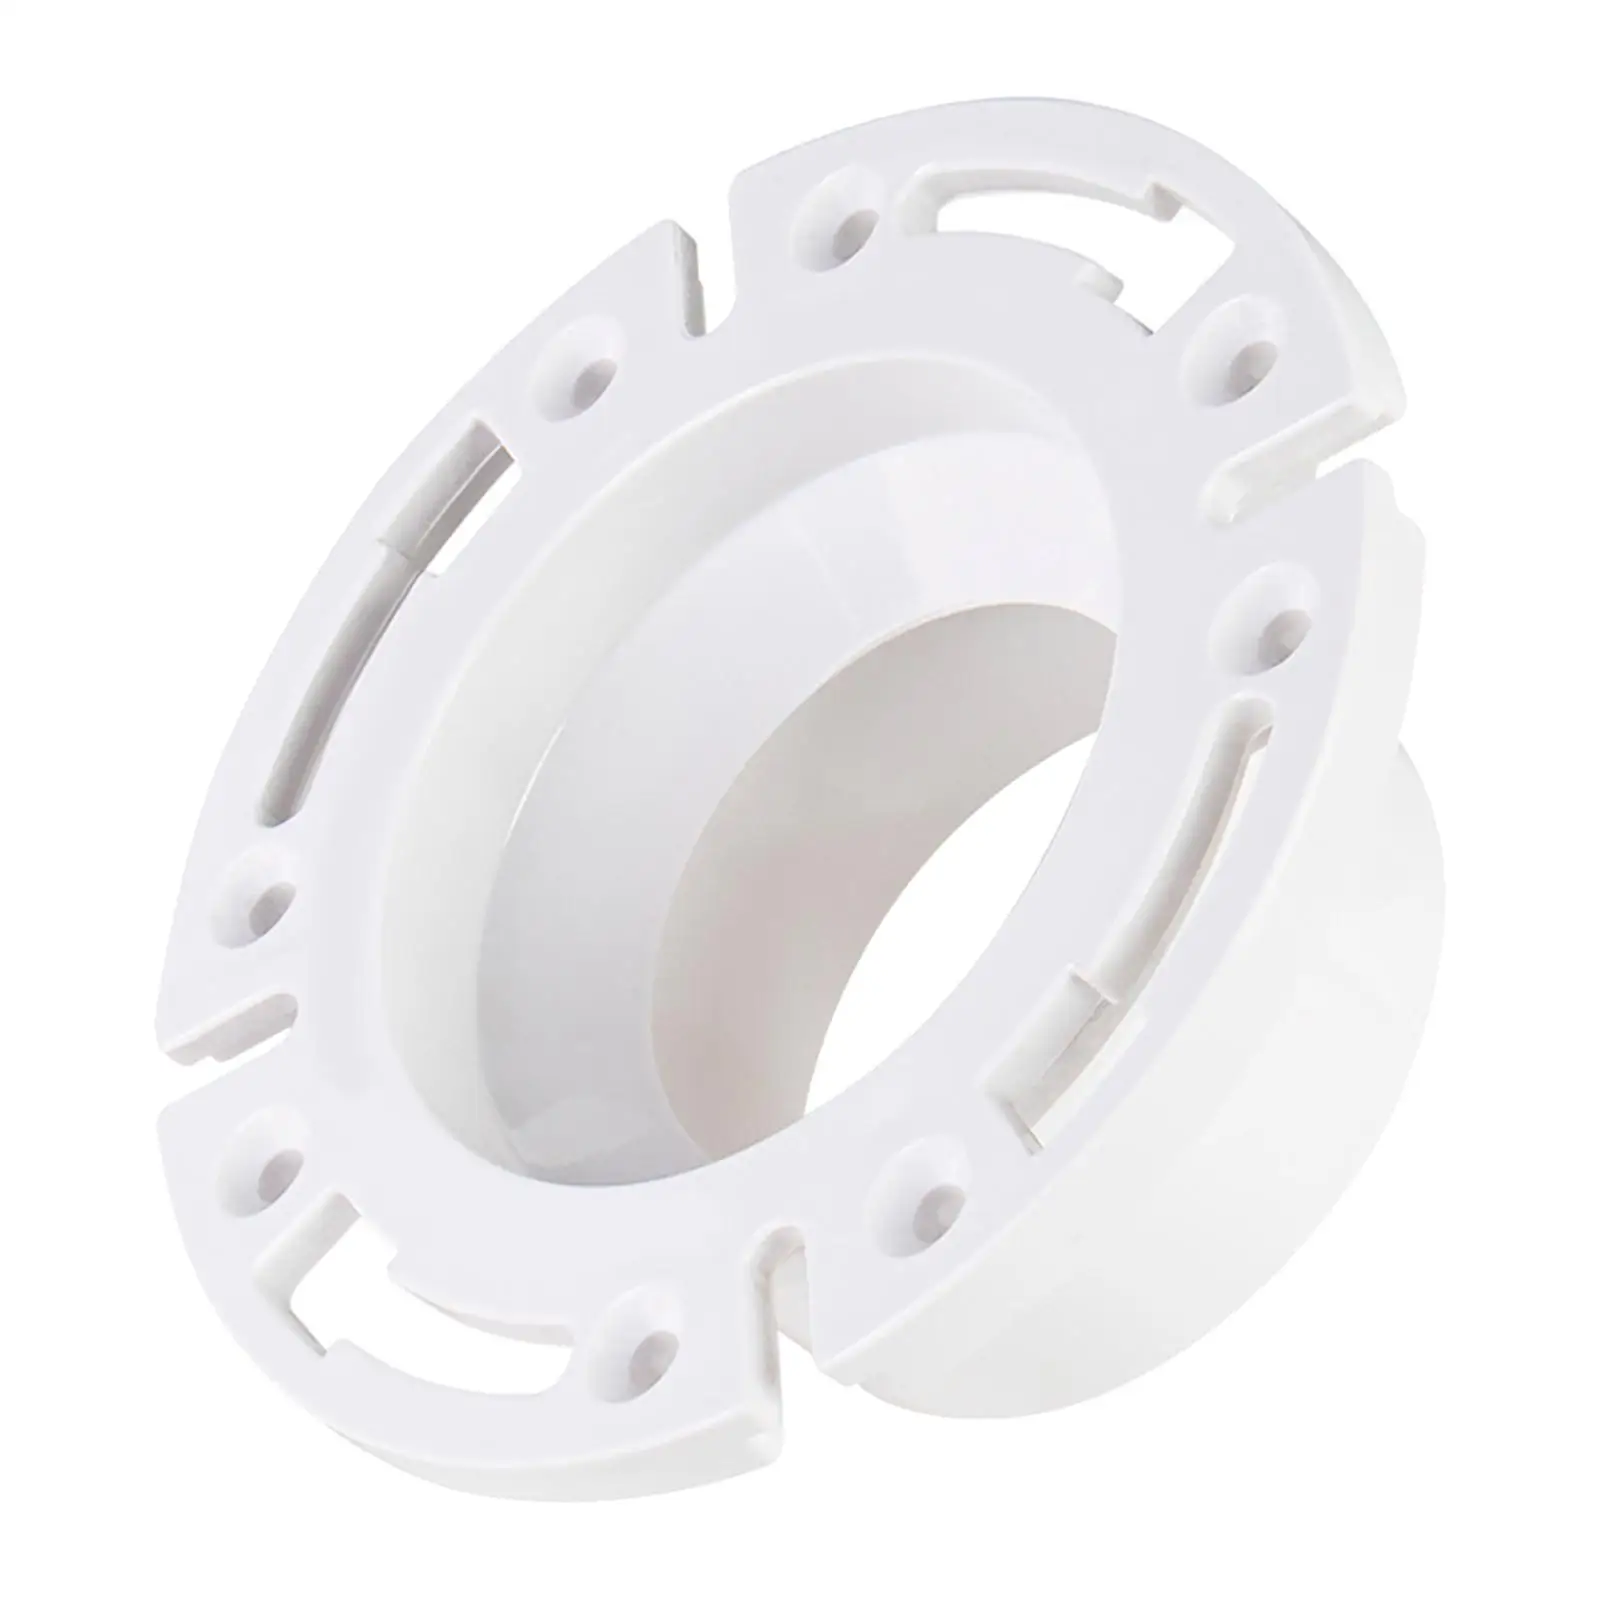 

Toilet INSTALL Flange Lightweight Accessory RV for 4410 4410 4310 3210 3310